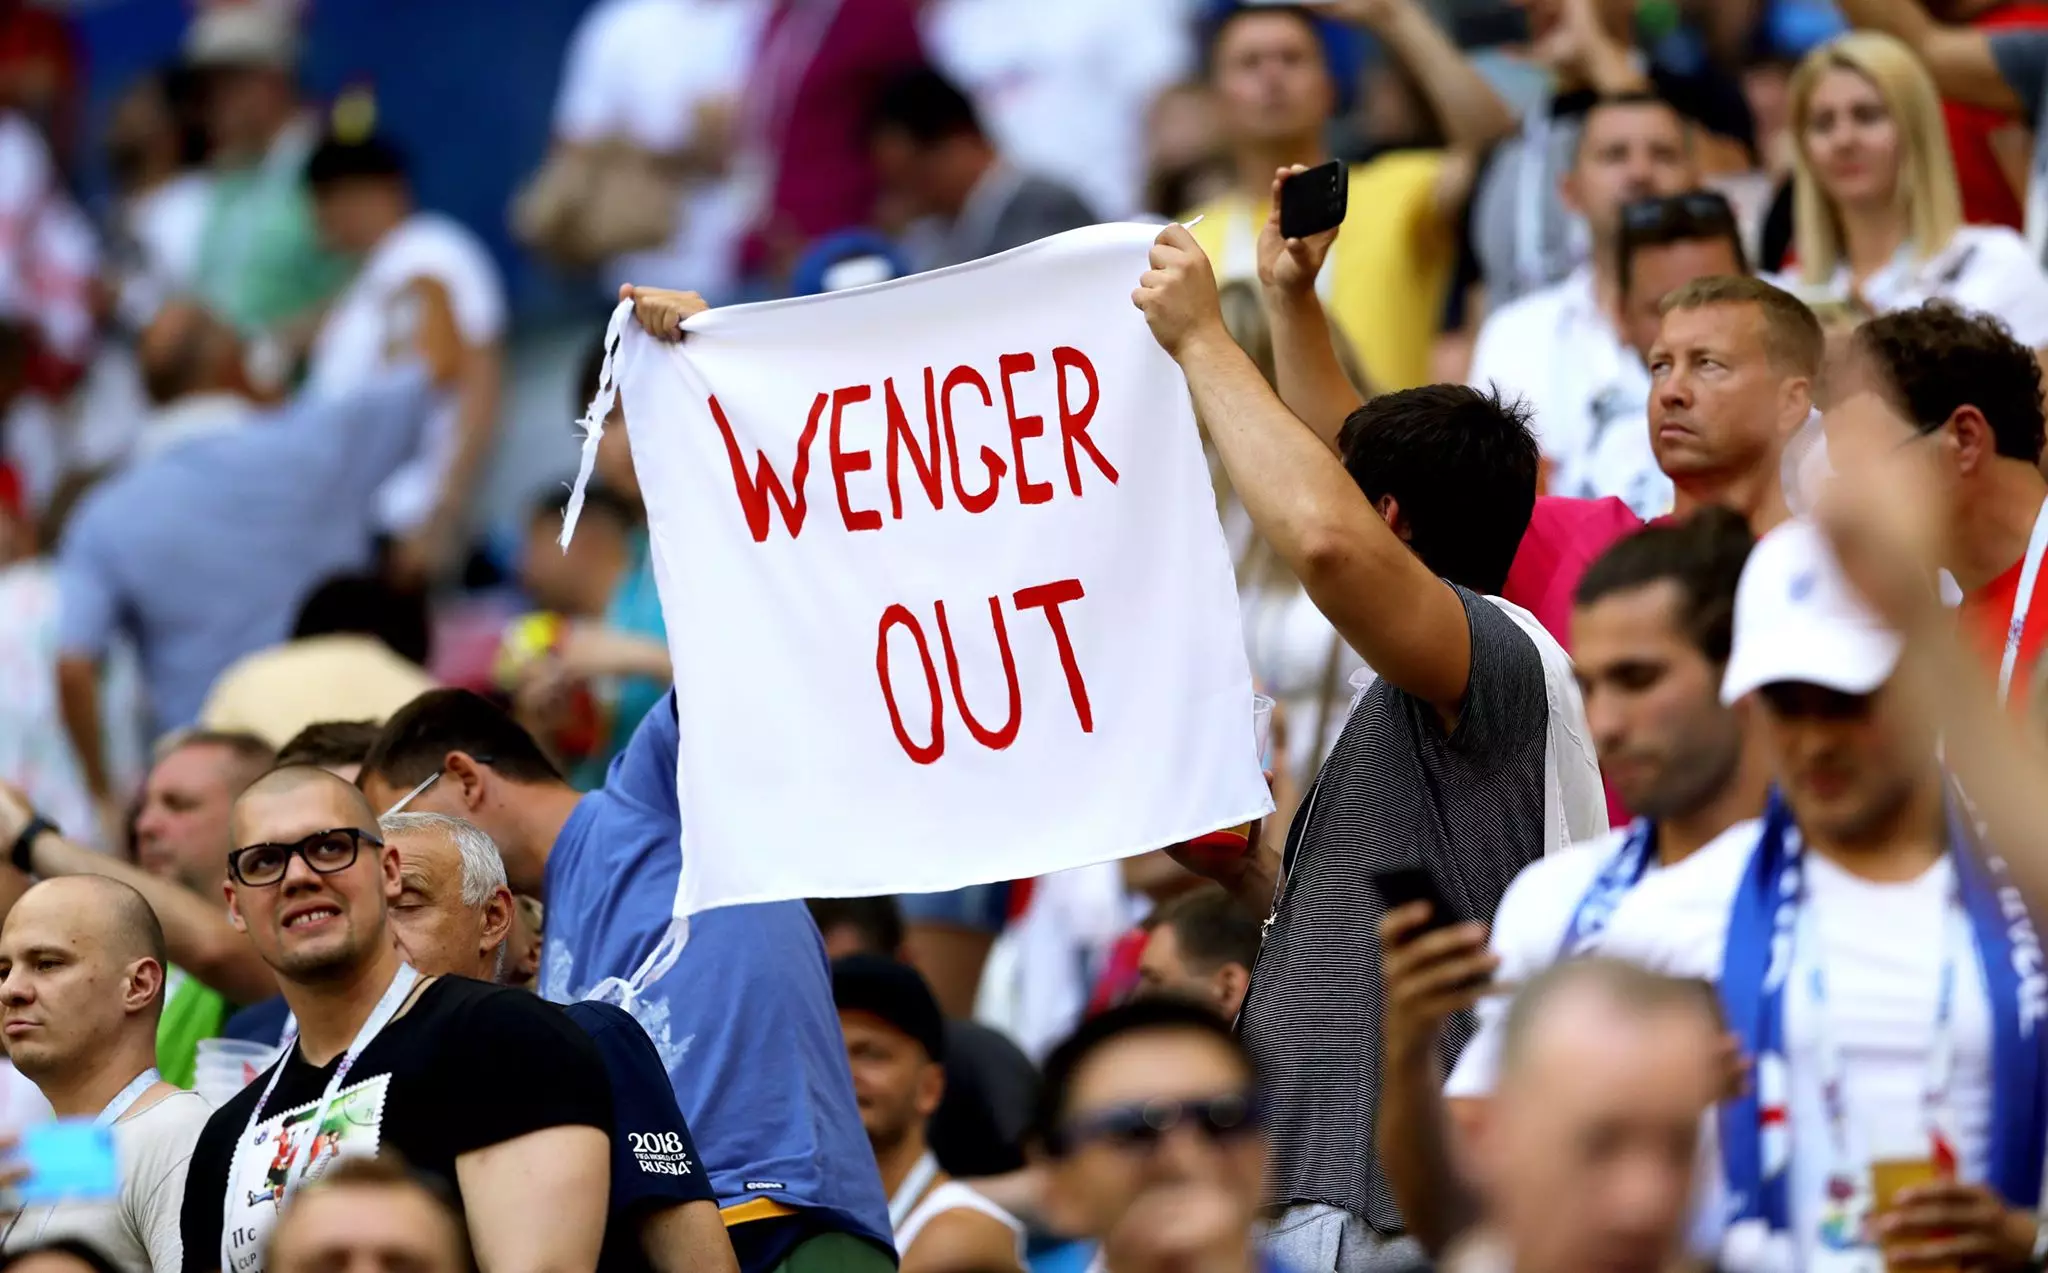 Wenger was subjected to a campaign to get rid of him in the last four years of his tenure. Image: PA Images